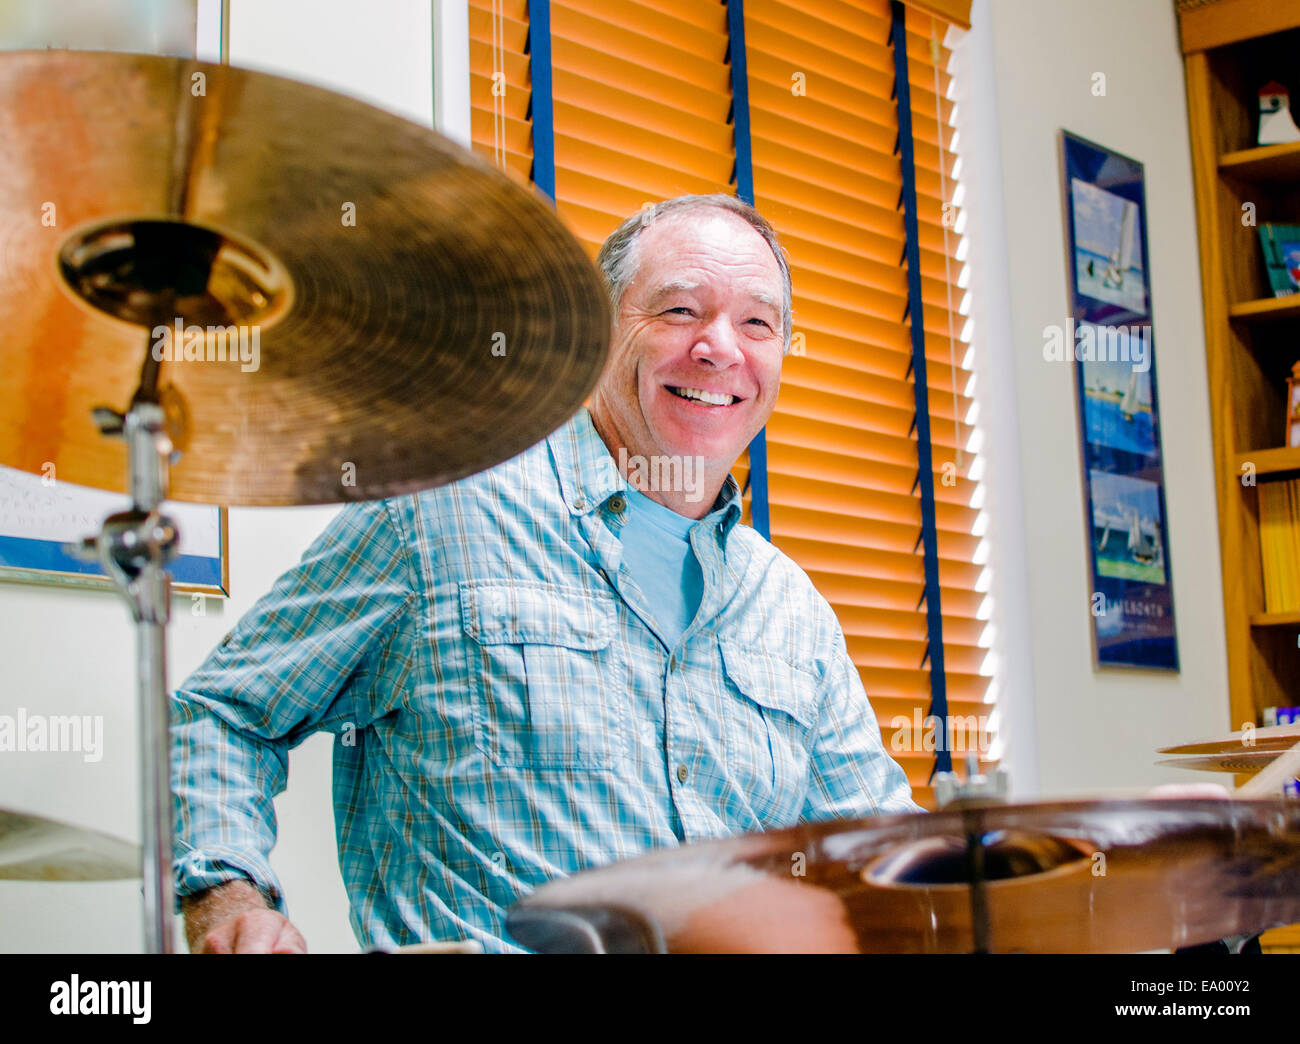 Mature man playing drums at home Stock Photo